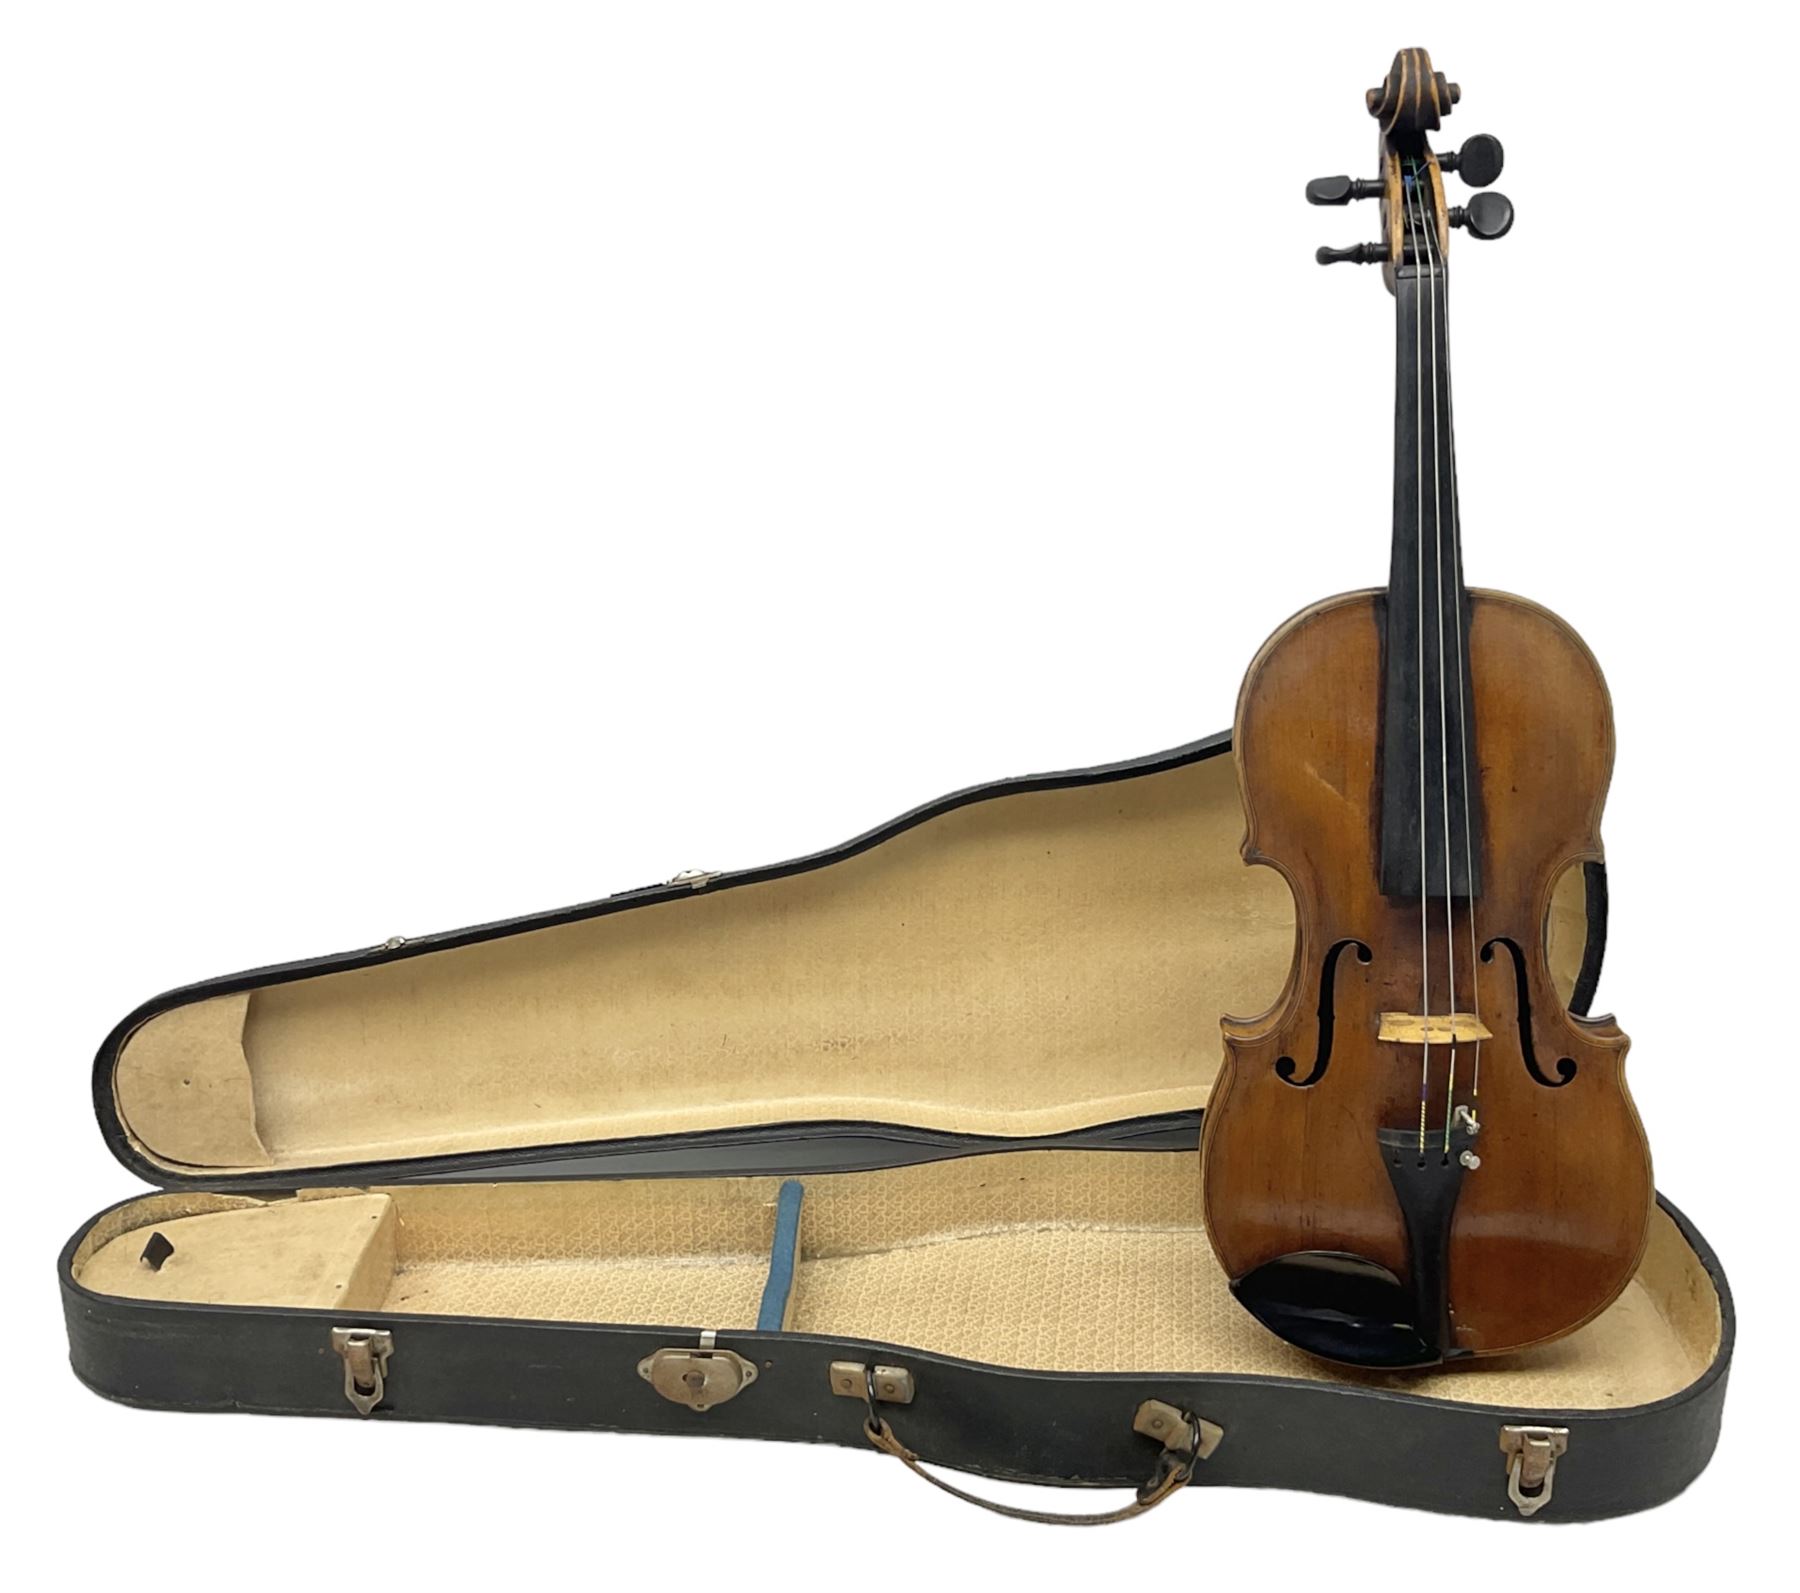 Mid-19th Mittenwald violin c1850s with 35.5cm two-piece maple back and ribs and spruce top, bears label ' Pietro Garnieri in Mantua 1758' L59.5cm; in carrying case - Musical & Scientific Instruments,